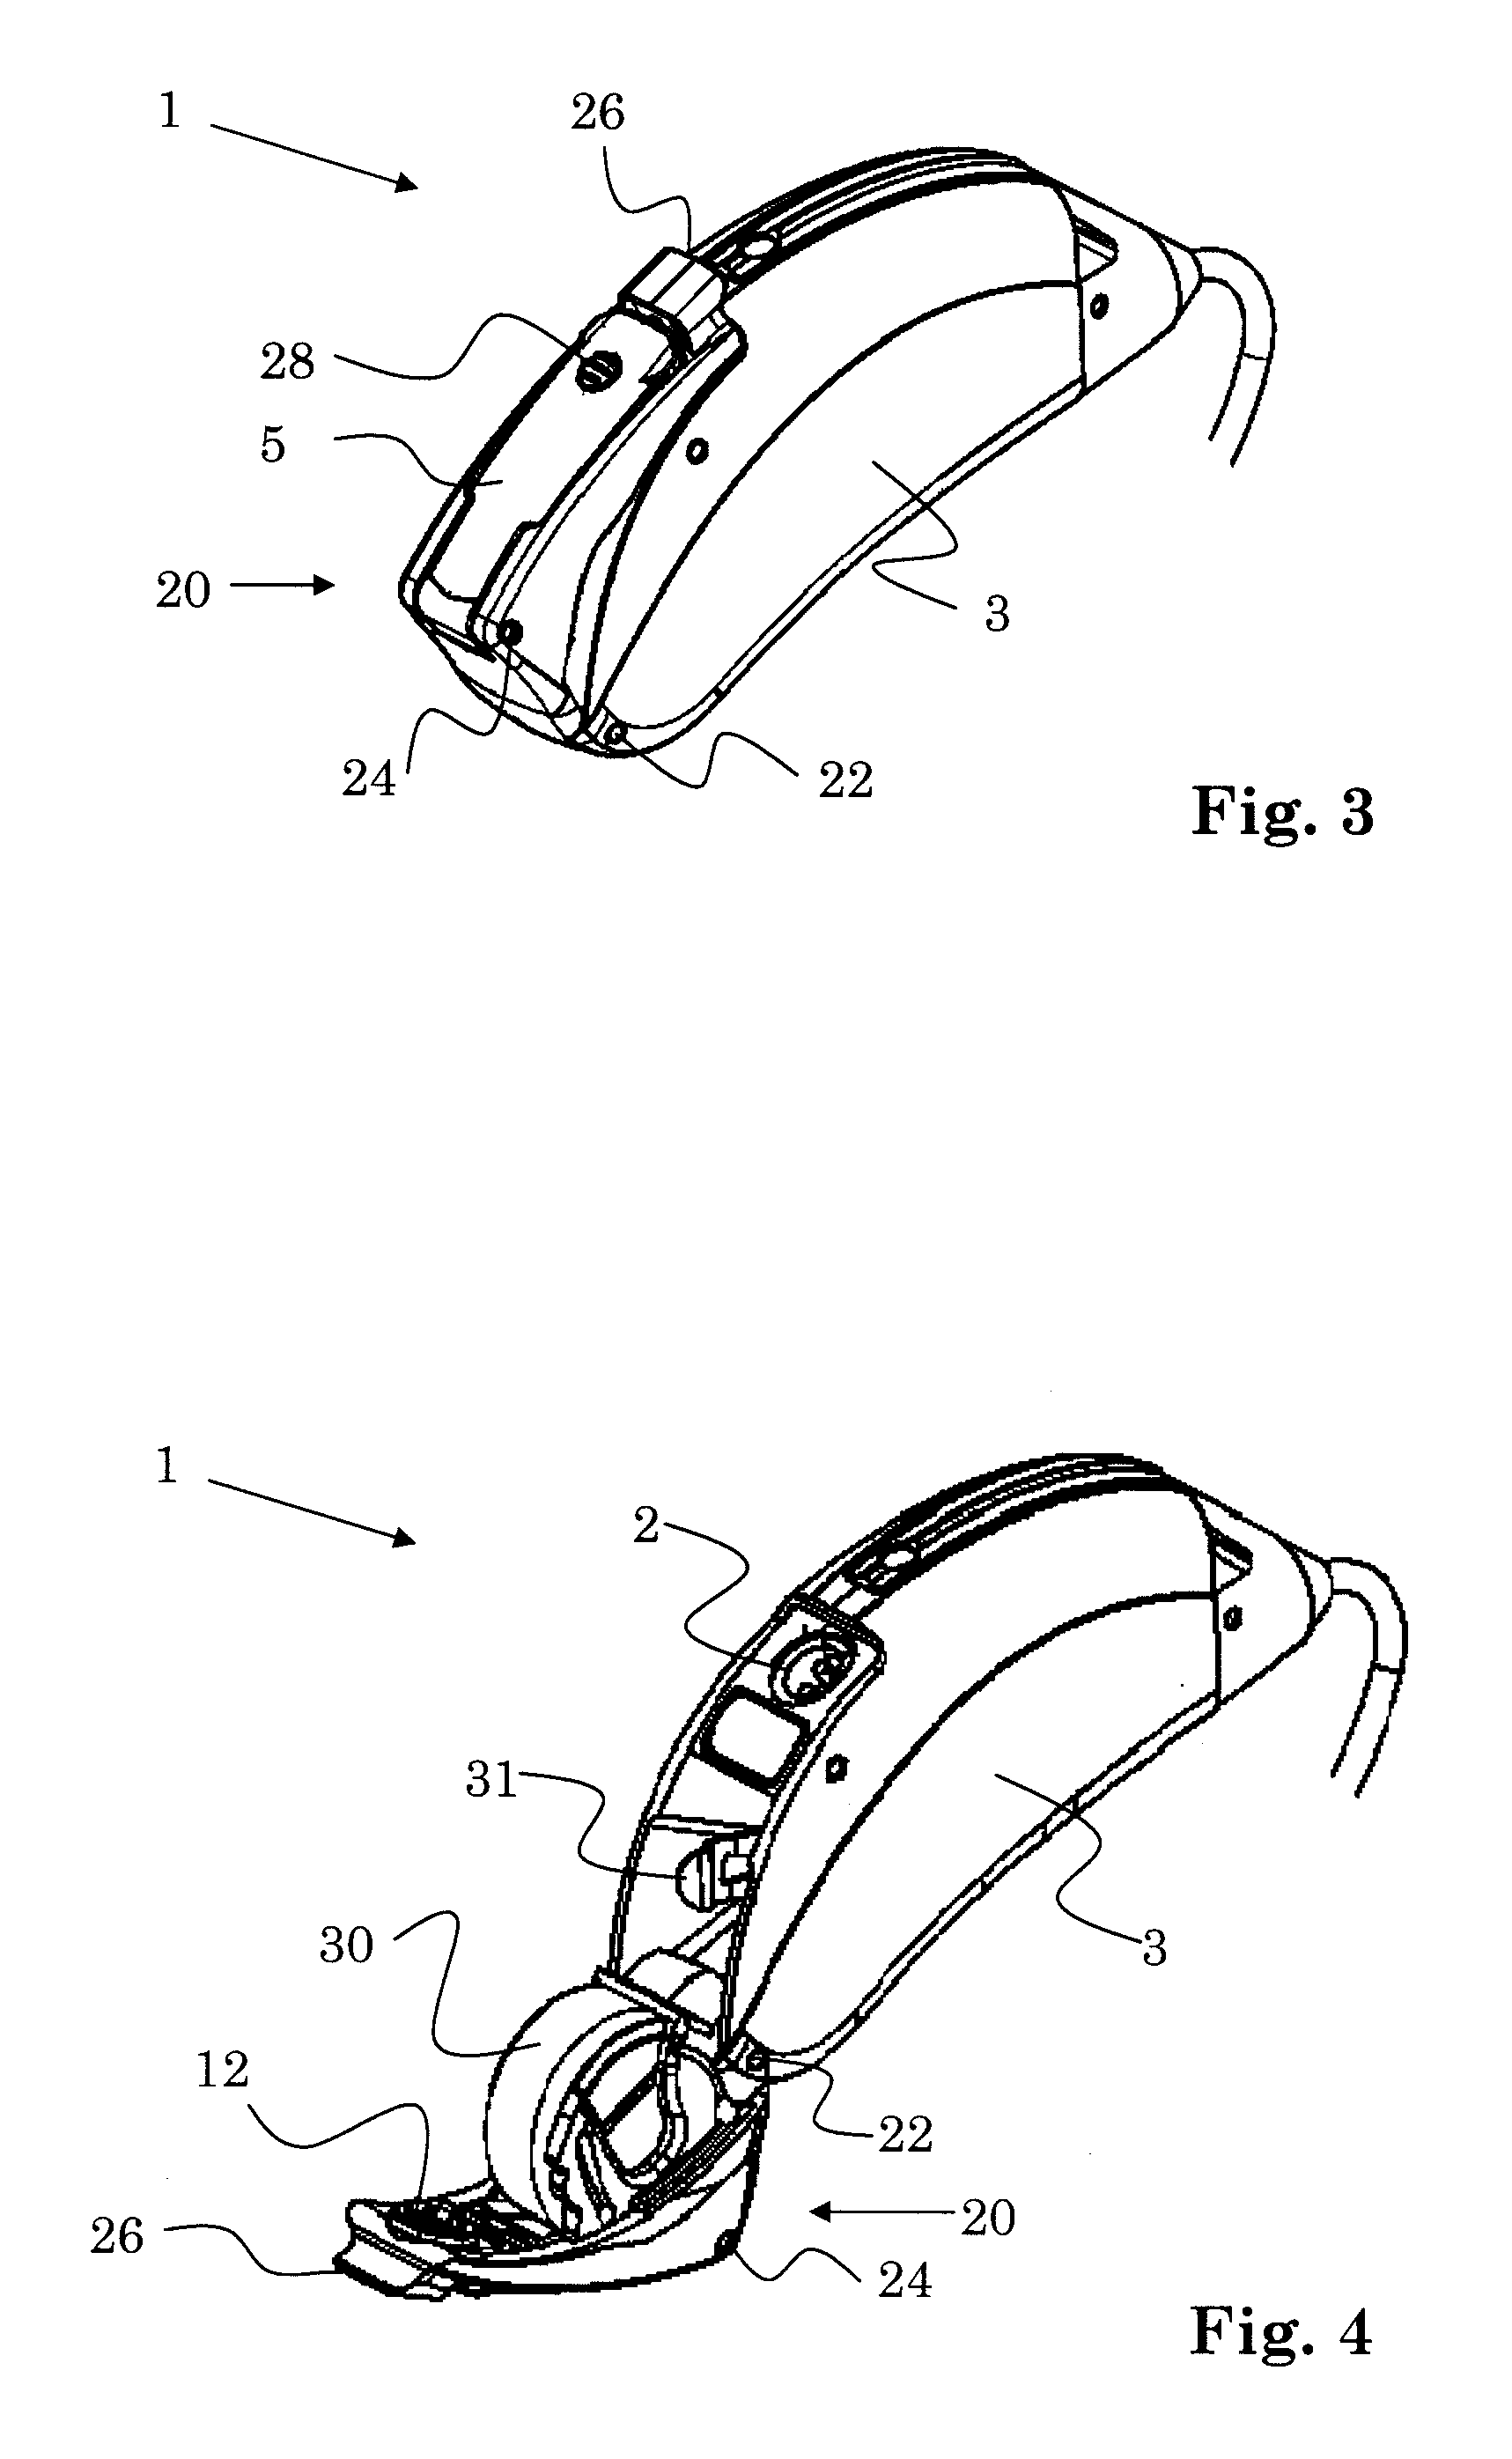 Hearing device with user control